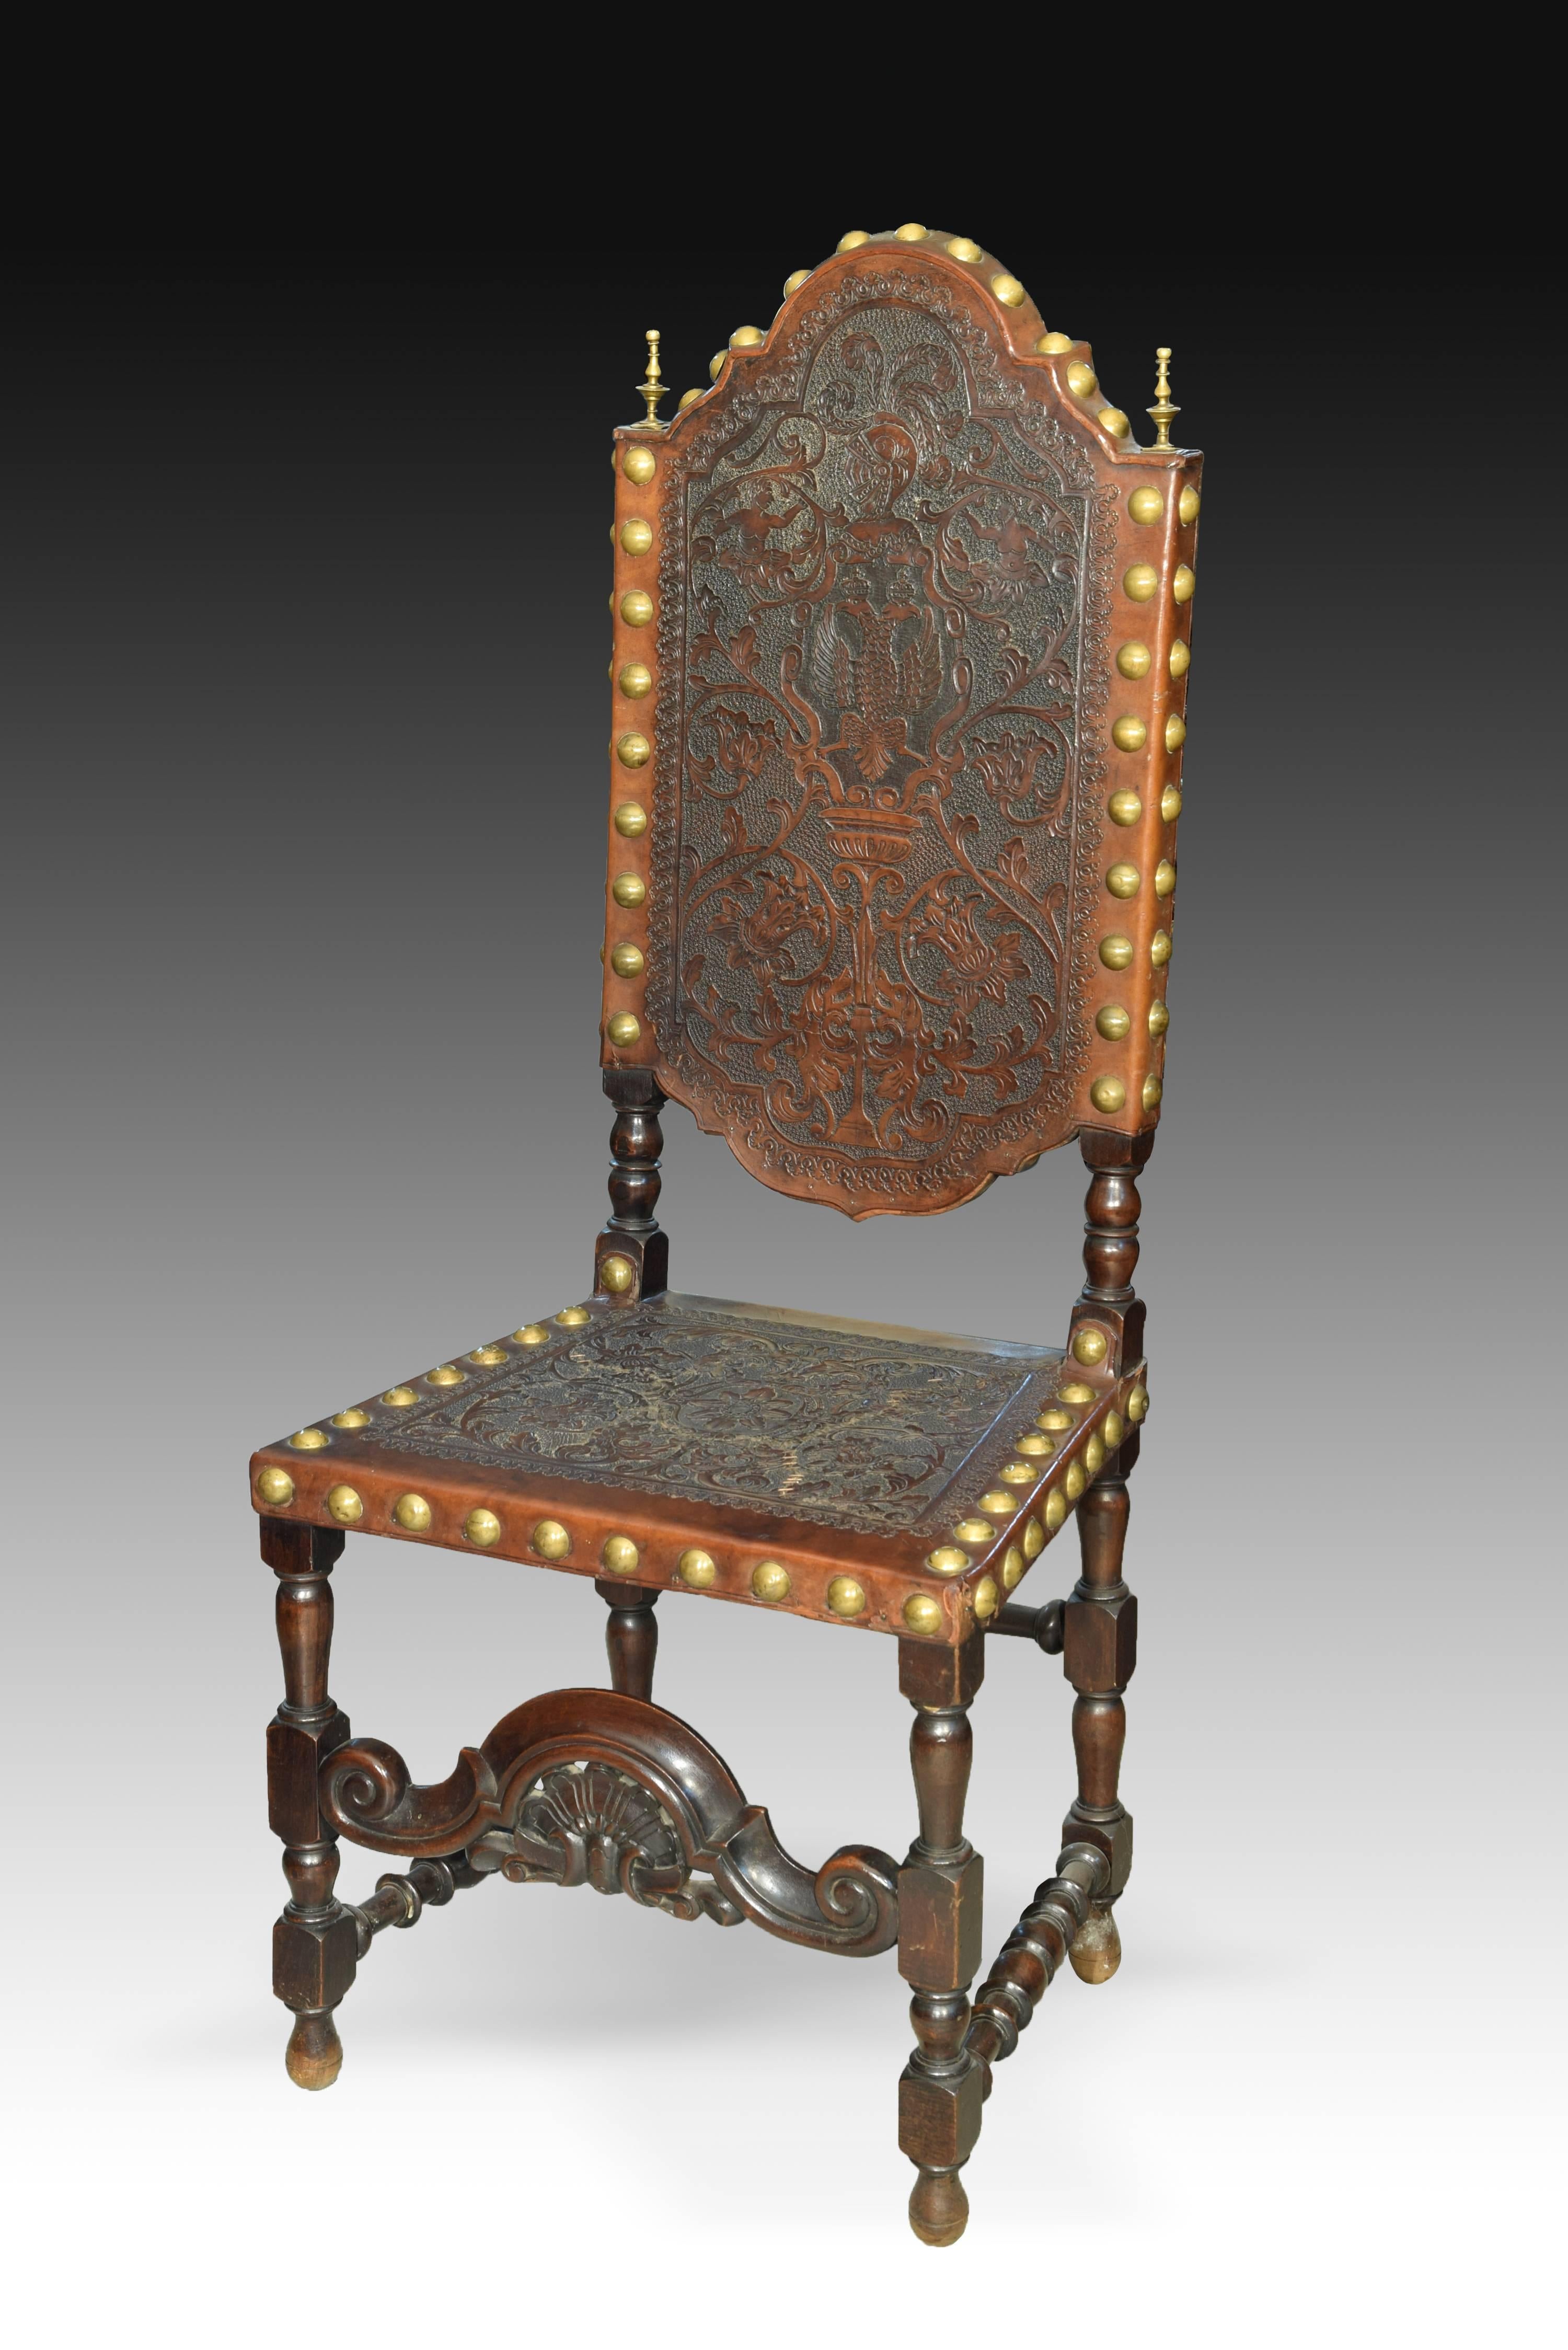 Baroque Revival Seats in Walnut and Embossed Leather, 19th Century For Sale